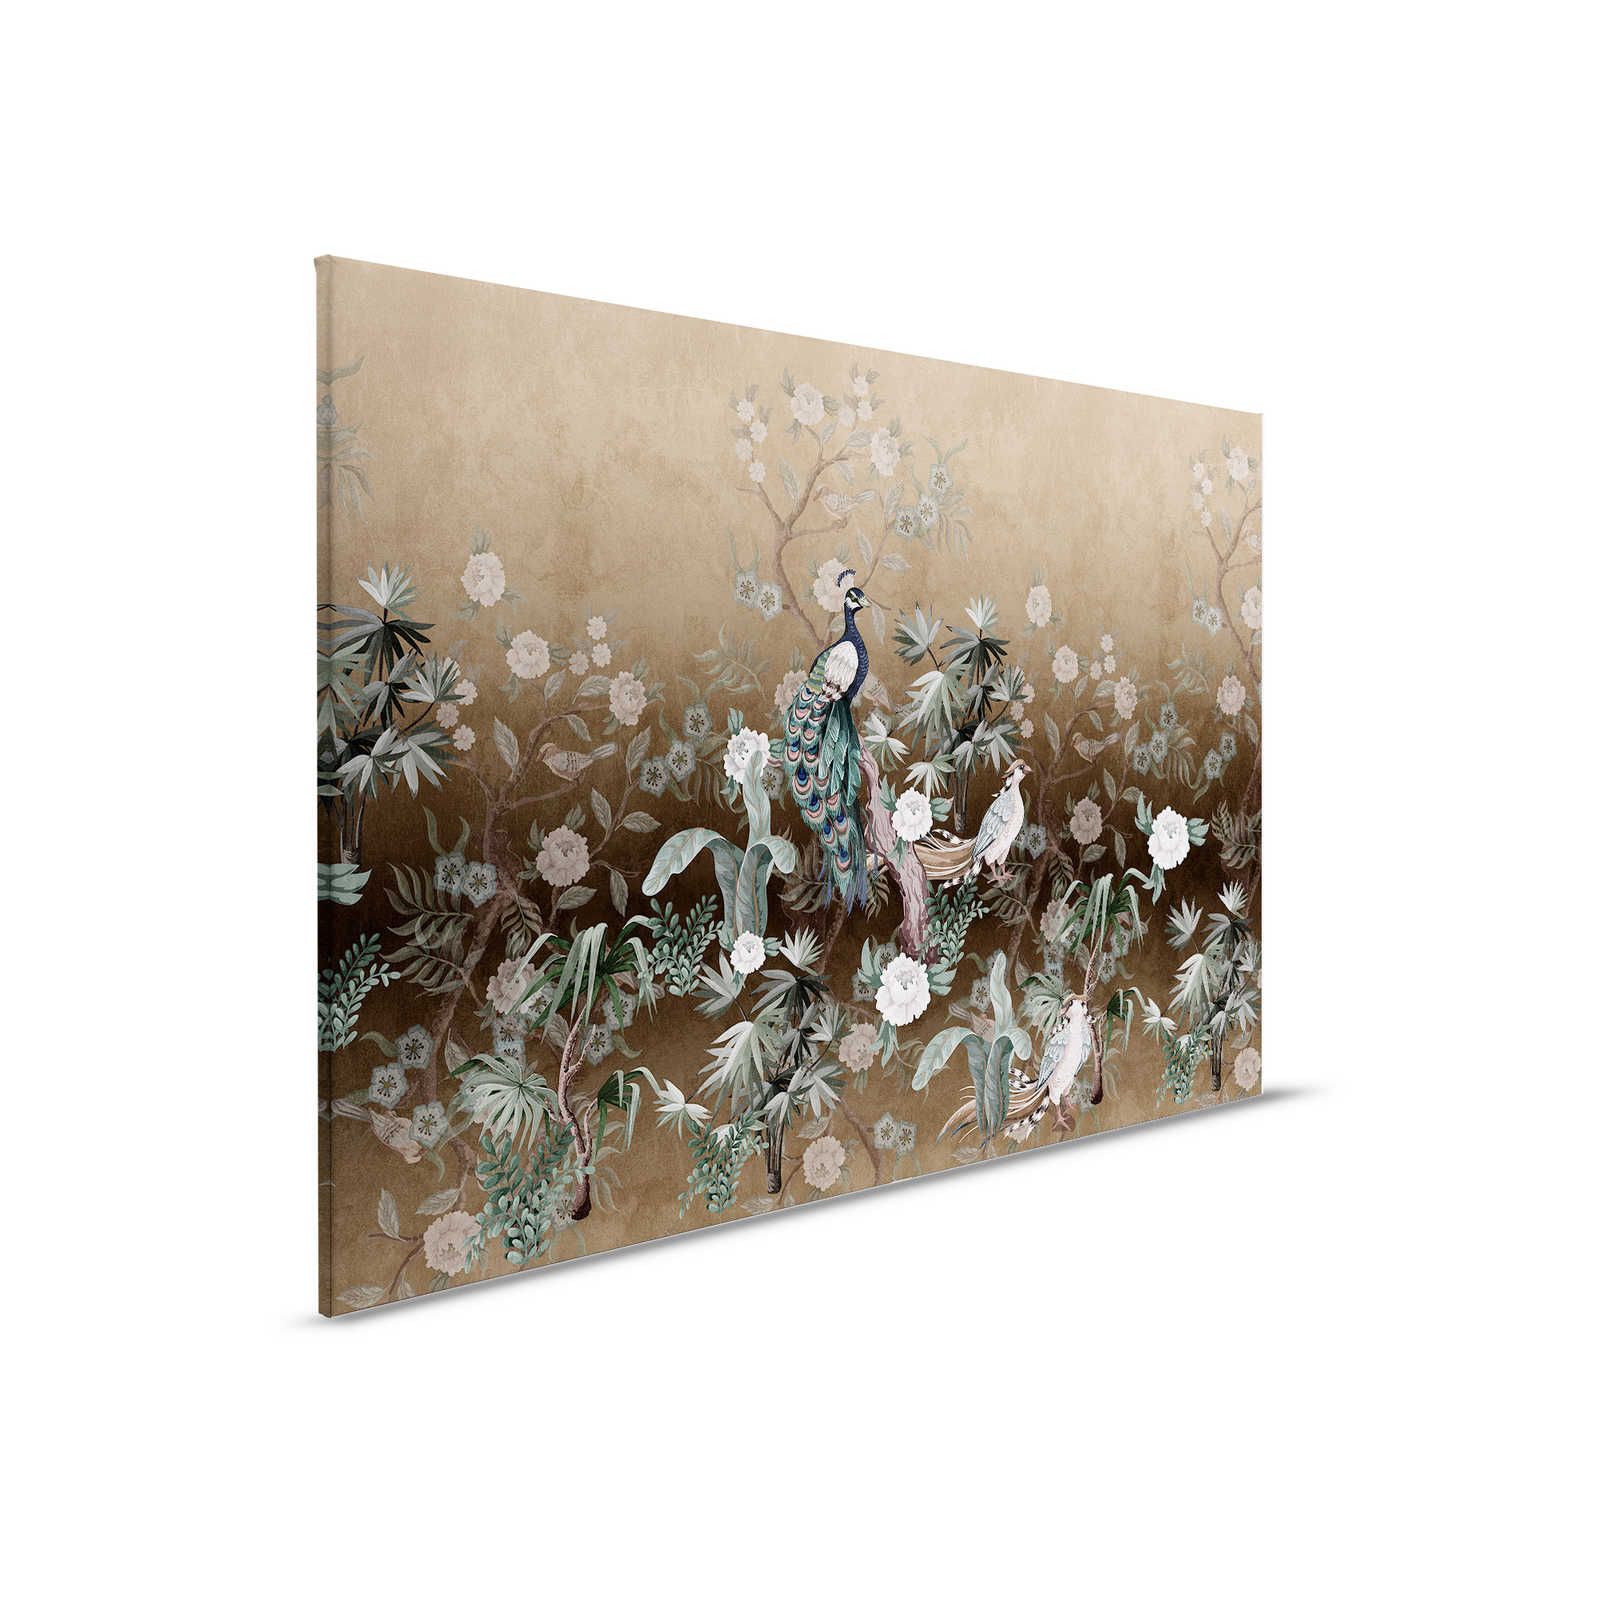 Peacock Island 2 - Canvas painting Peacock garden with flowers in beige - 0,90 m x 0,60 m
